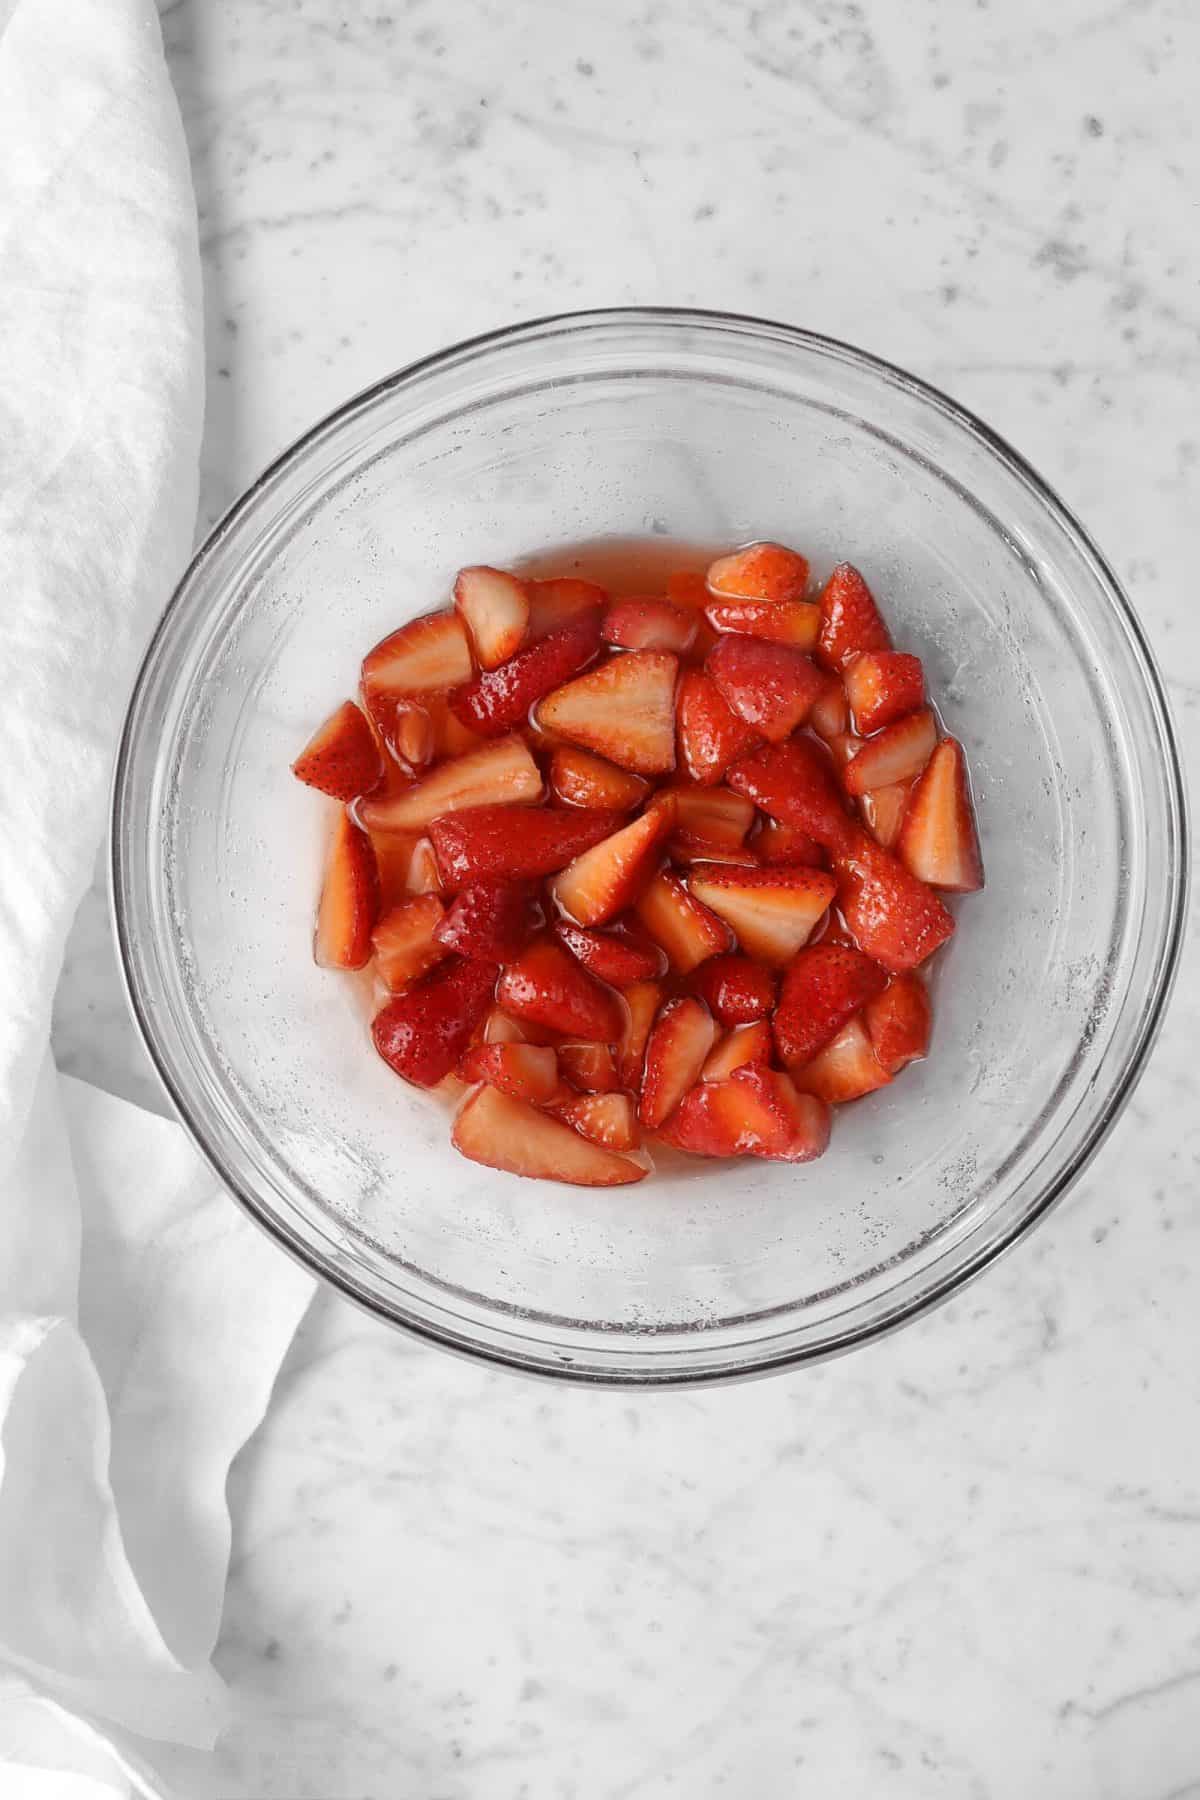 macerated strawberries in a glass bowl with a white napkin